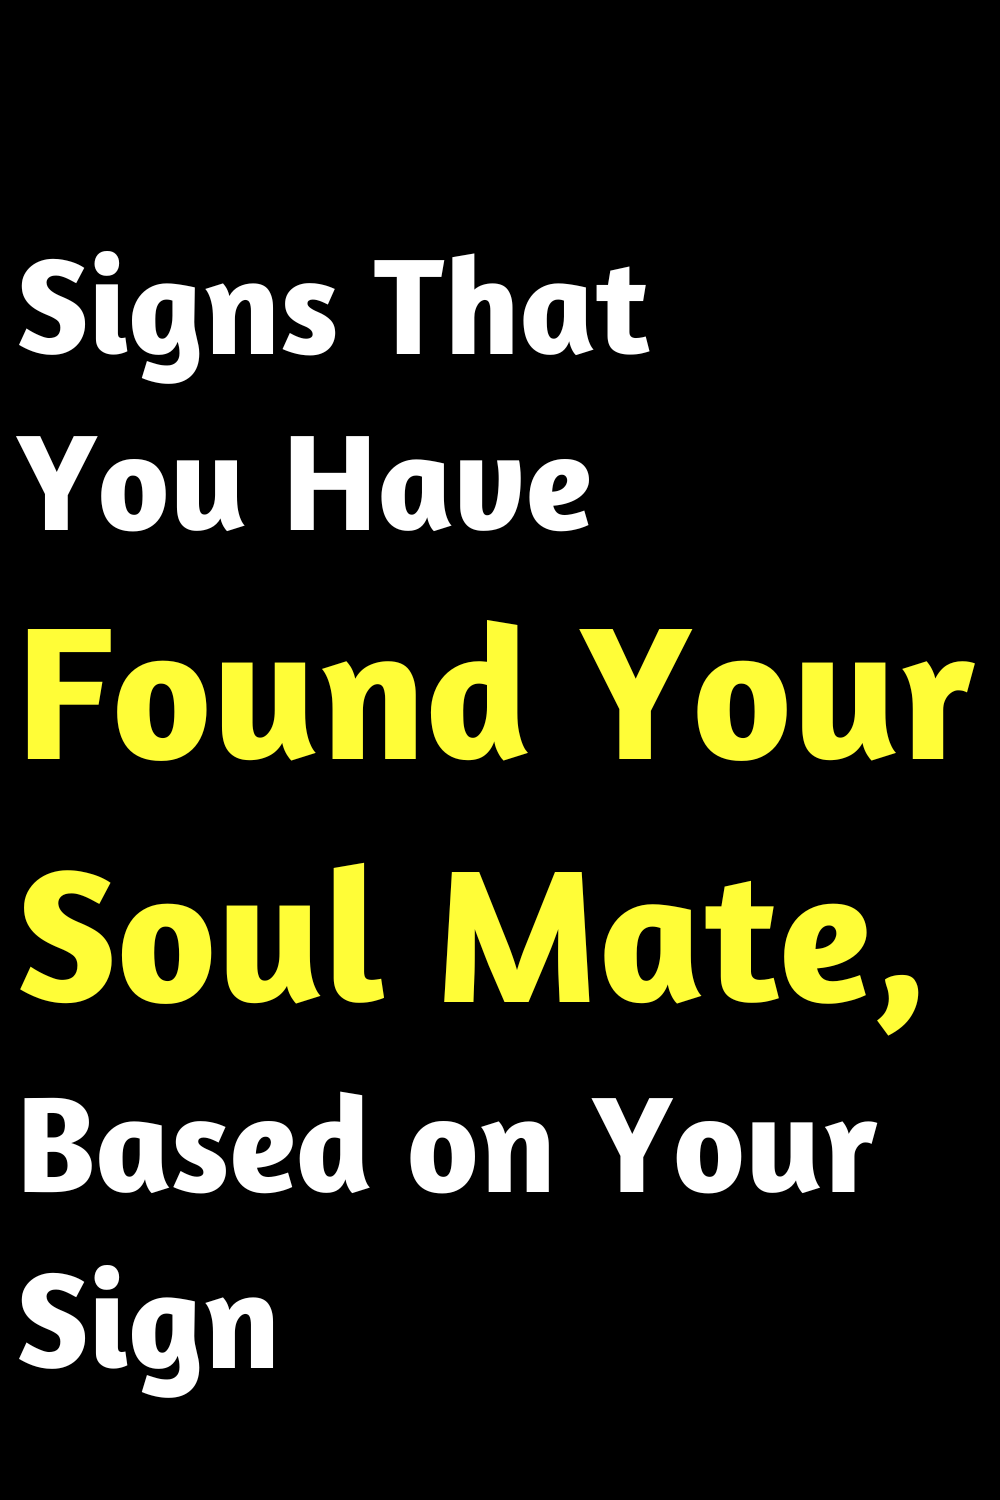 Signs That You Have Found Your Soul Mate, Based on Your Sign